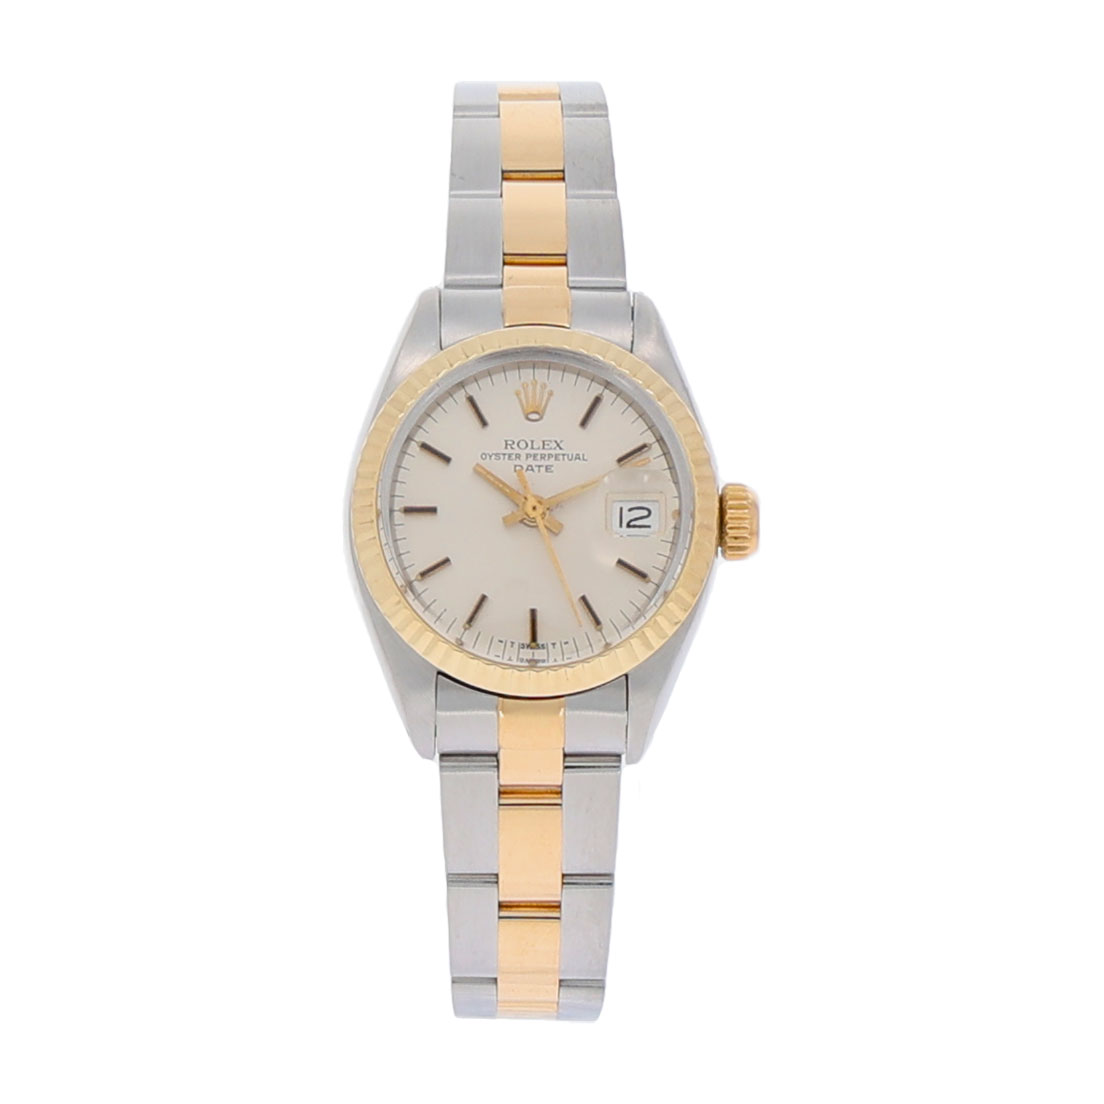 Rolex Oyster Perpetual Lady Date Ref. 6917 Steel/Gold 18K Oyster Bracelet 1976 Top Condition